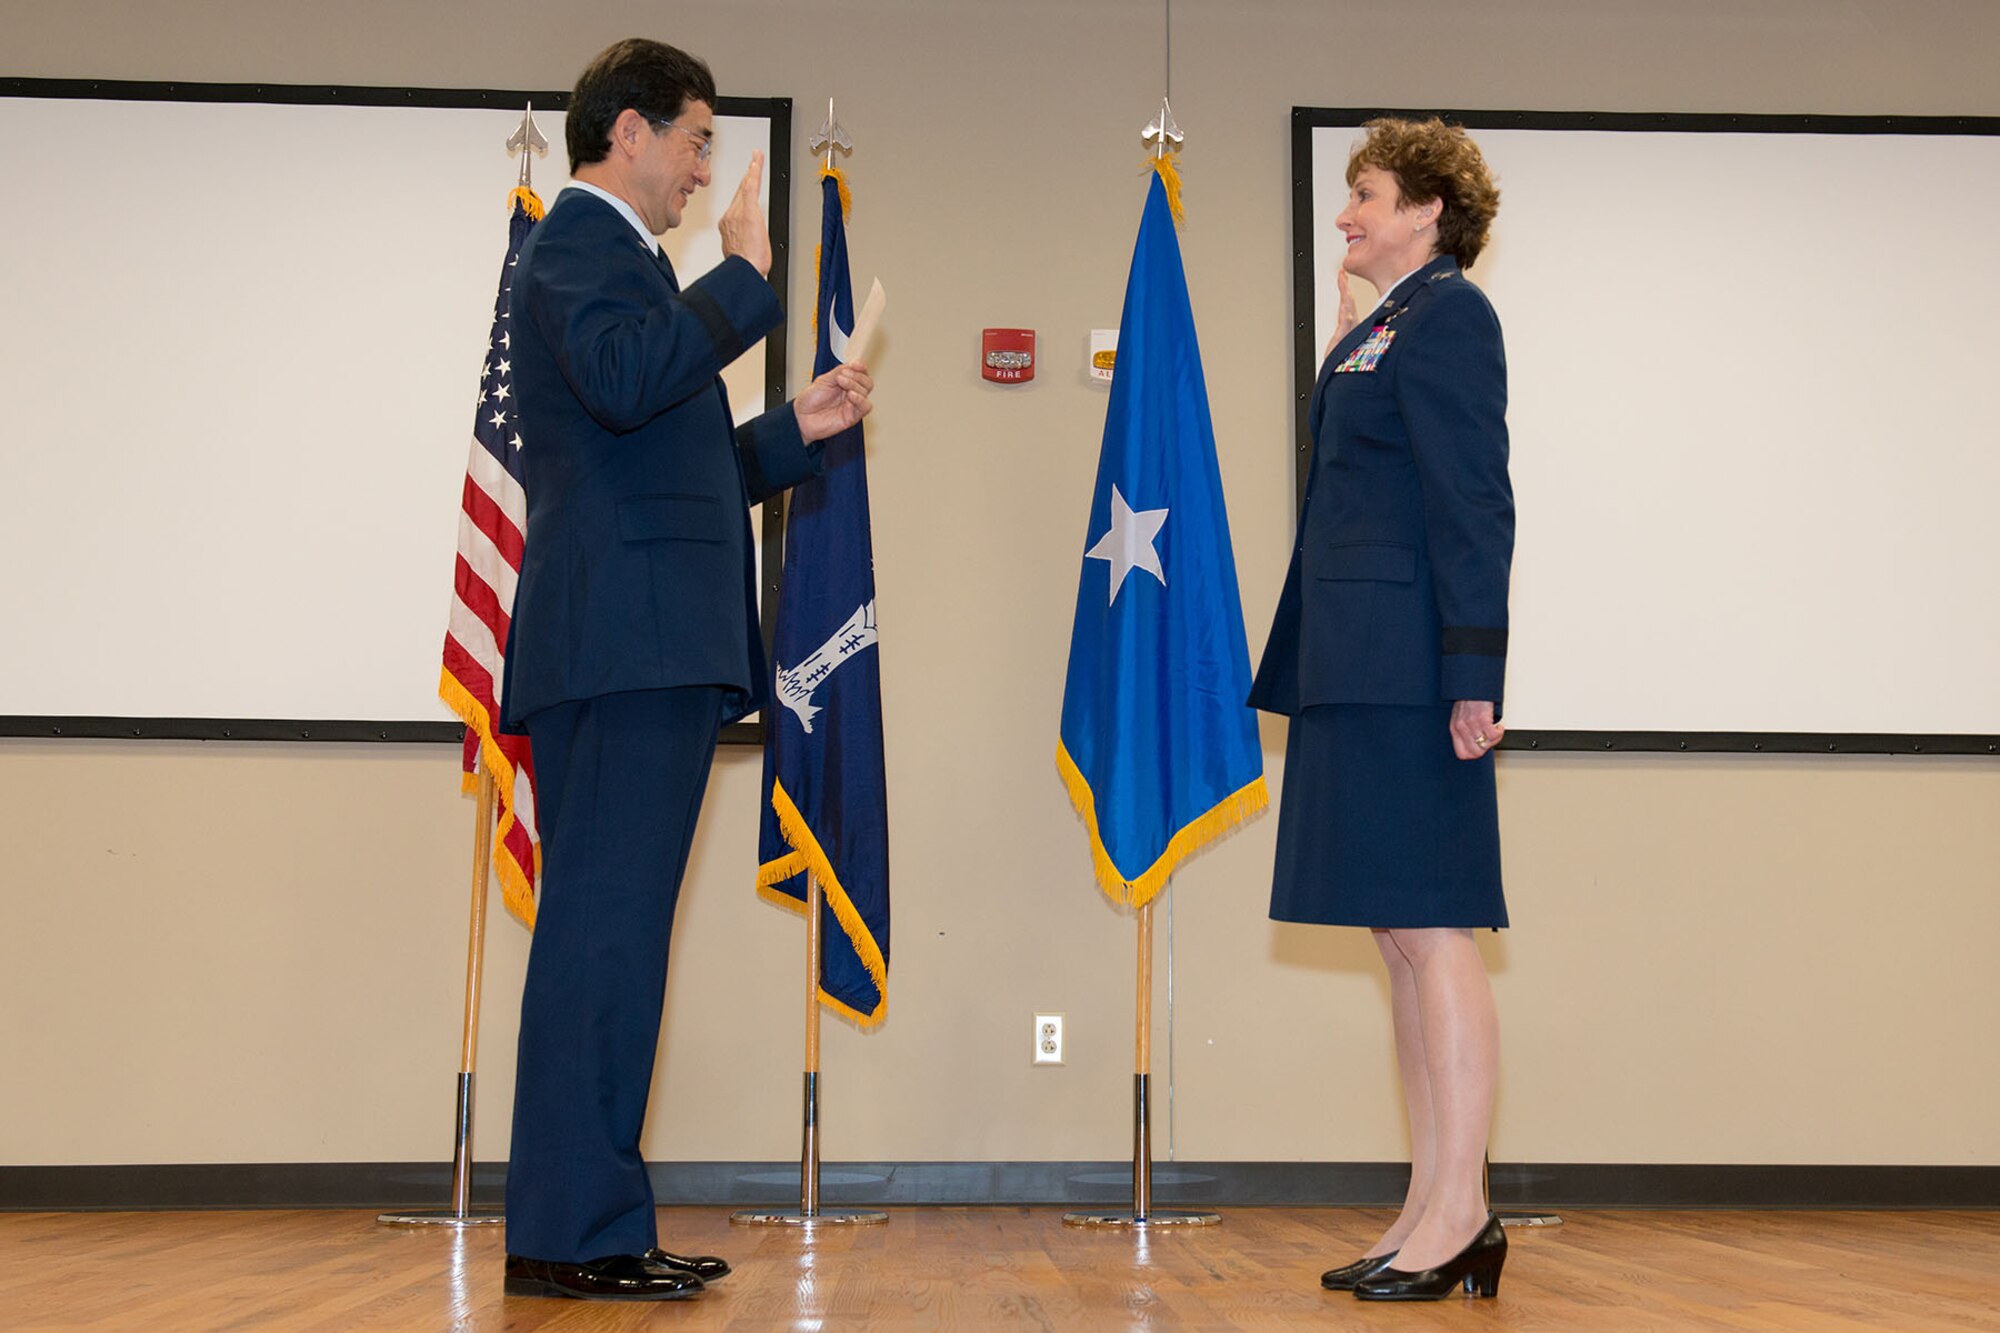 U.S. Air Force Col. Theresa Prince, Air National Guard Assistant to the Chief Nurse Corps at the Defense Health Headquarters, is promoted to the rank of Brig. Gen. in the South Carolina Air National Guard at McEntire Joint National Guard Base, Eastover, S.C., Nov. 7, 2015.  Prince has 37 years of military experience, 19 in the South Carolina Air National Guard and is the first female to be promoted as a general officer in the unit. (U.S. Air National Guard photo by Tech. Sgt. Jorge Intriago/Released)